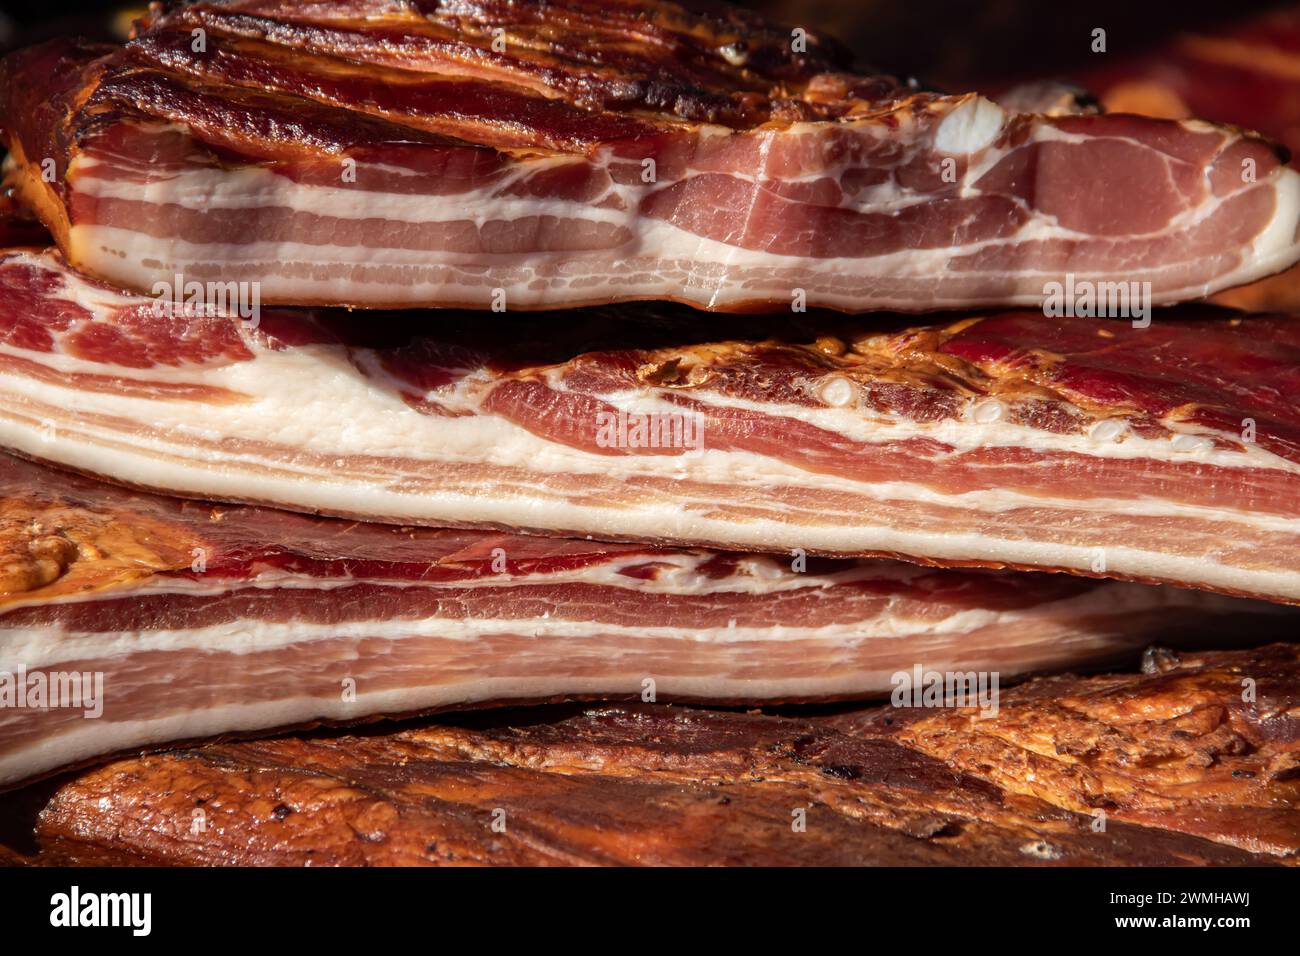 Exposed bacon and dried meat domestic products presented for sale on a farmer's market in Kacarevo village, gastro bacon and dry meat products Stock Photo